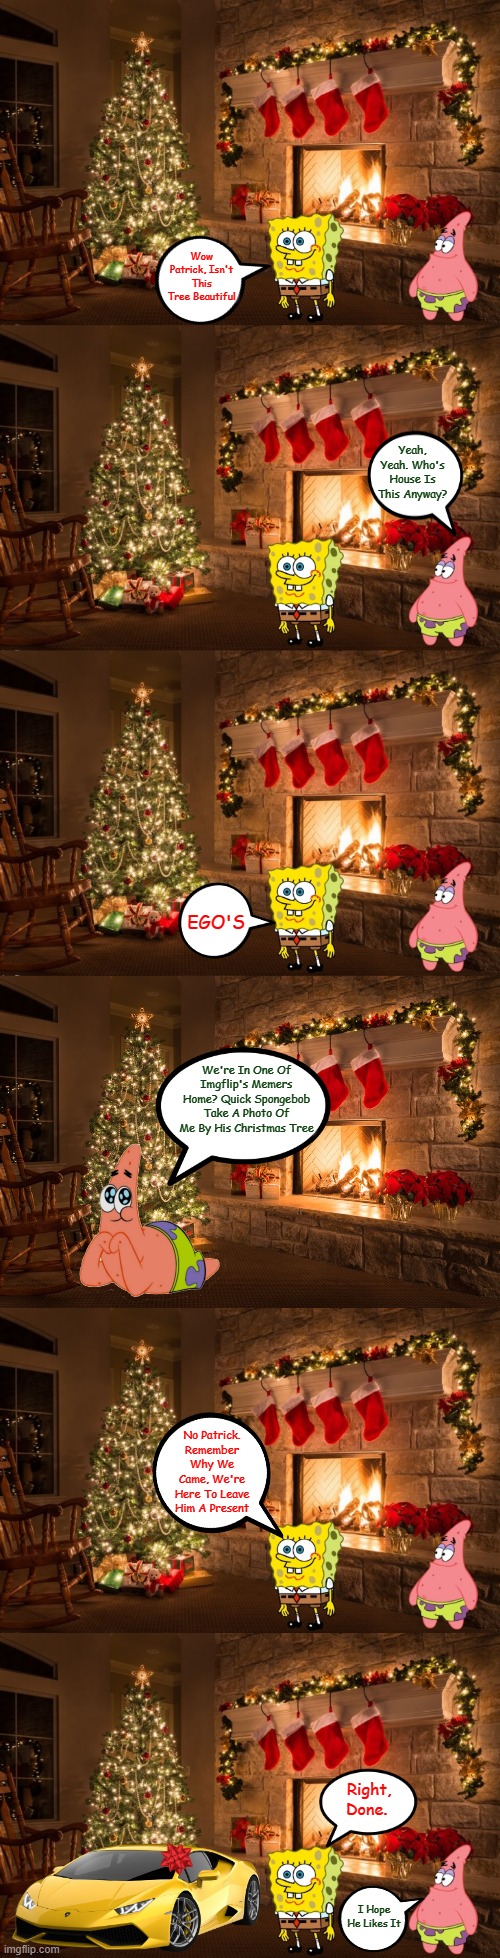 Someone Got Their Christmas Present Early. (Spongebob Christmas Weekend Dec 11-13) | Wow Patrick, Isn't This Tree Beautiful; Yeah, Yeah. Who's House Is This Anyway? EGO'S; We're In One Of Imgflip's Memers Home? Quick Spongebob Take A Photo Of Me By His Christmas Tree; No Patrick. Remember Why We Came, We're Here To Leave Him A Present; Right, Done. I Hope He Likes It | image tagged in christmas spongbob and patrick house,egos,spongebob christmas weekend,memes,44colt,td1437 | made w/ Imgflip meme maker